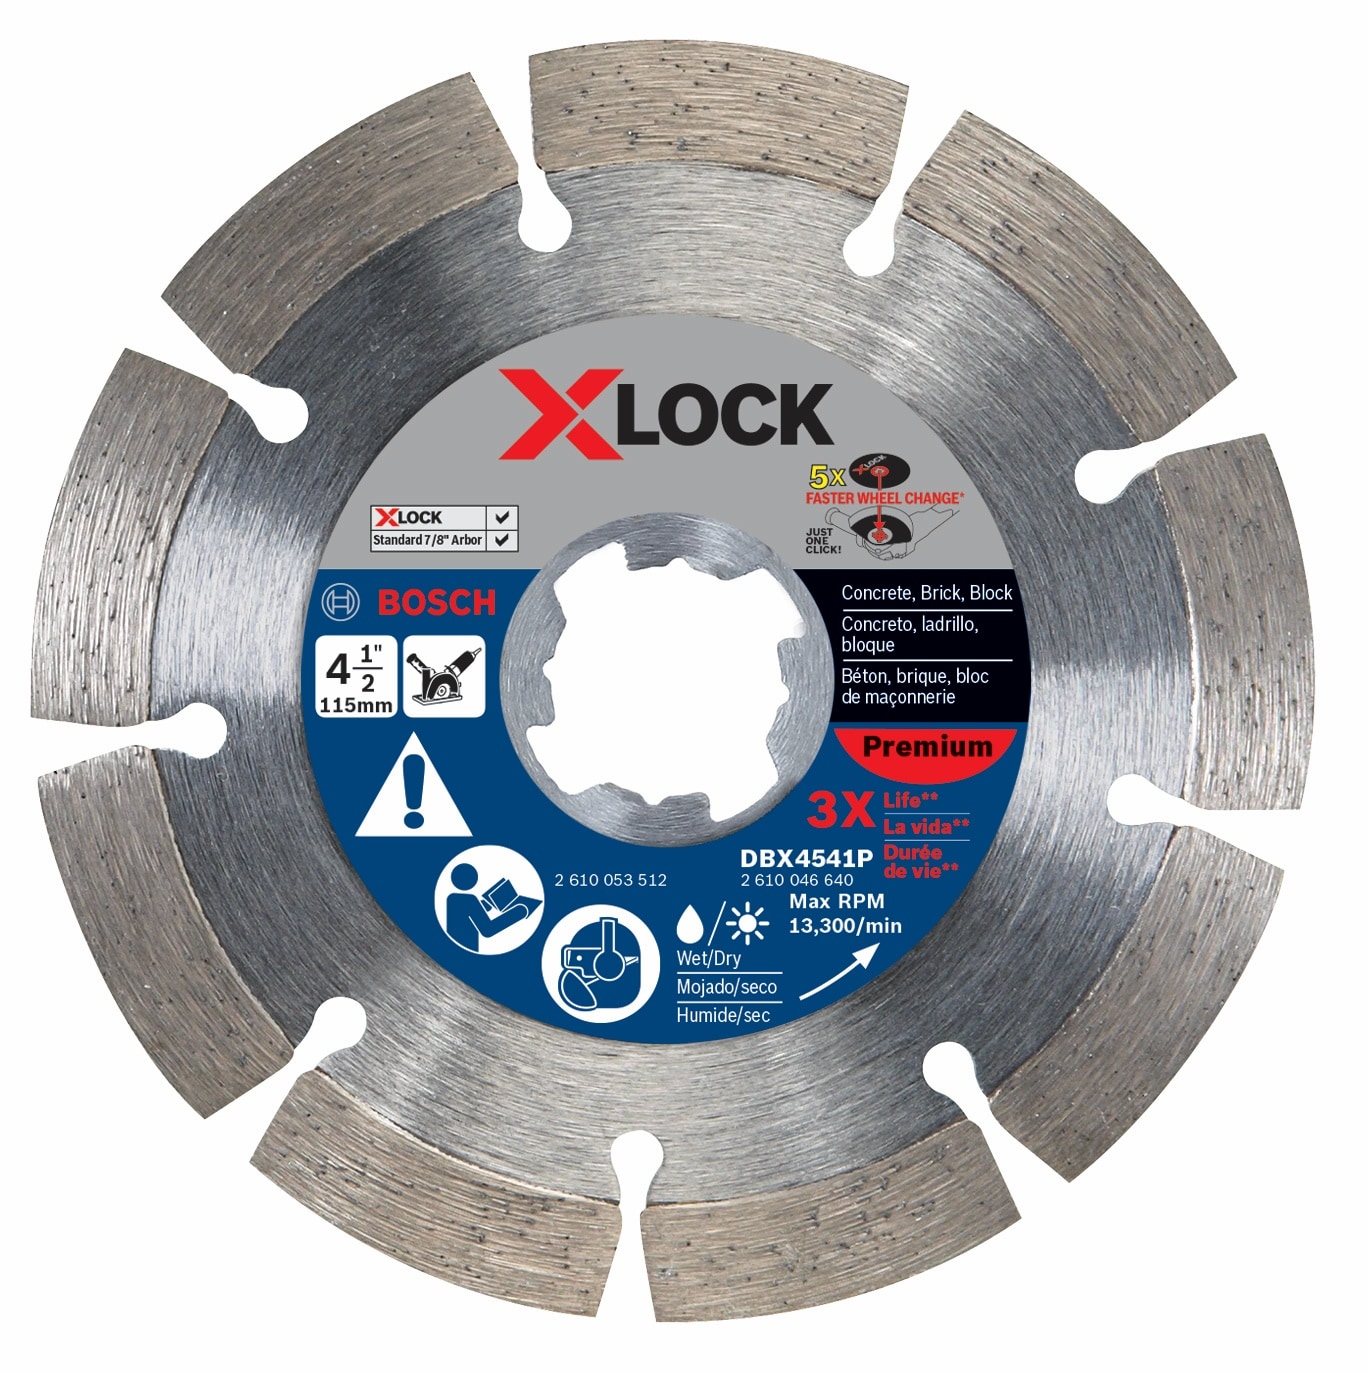 2 Discs 115mm Segmented Diamond Cutting Disc for angle grinder 4.5" Blade 